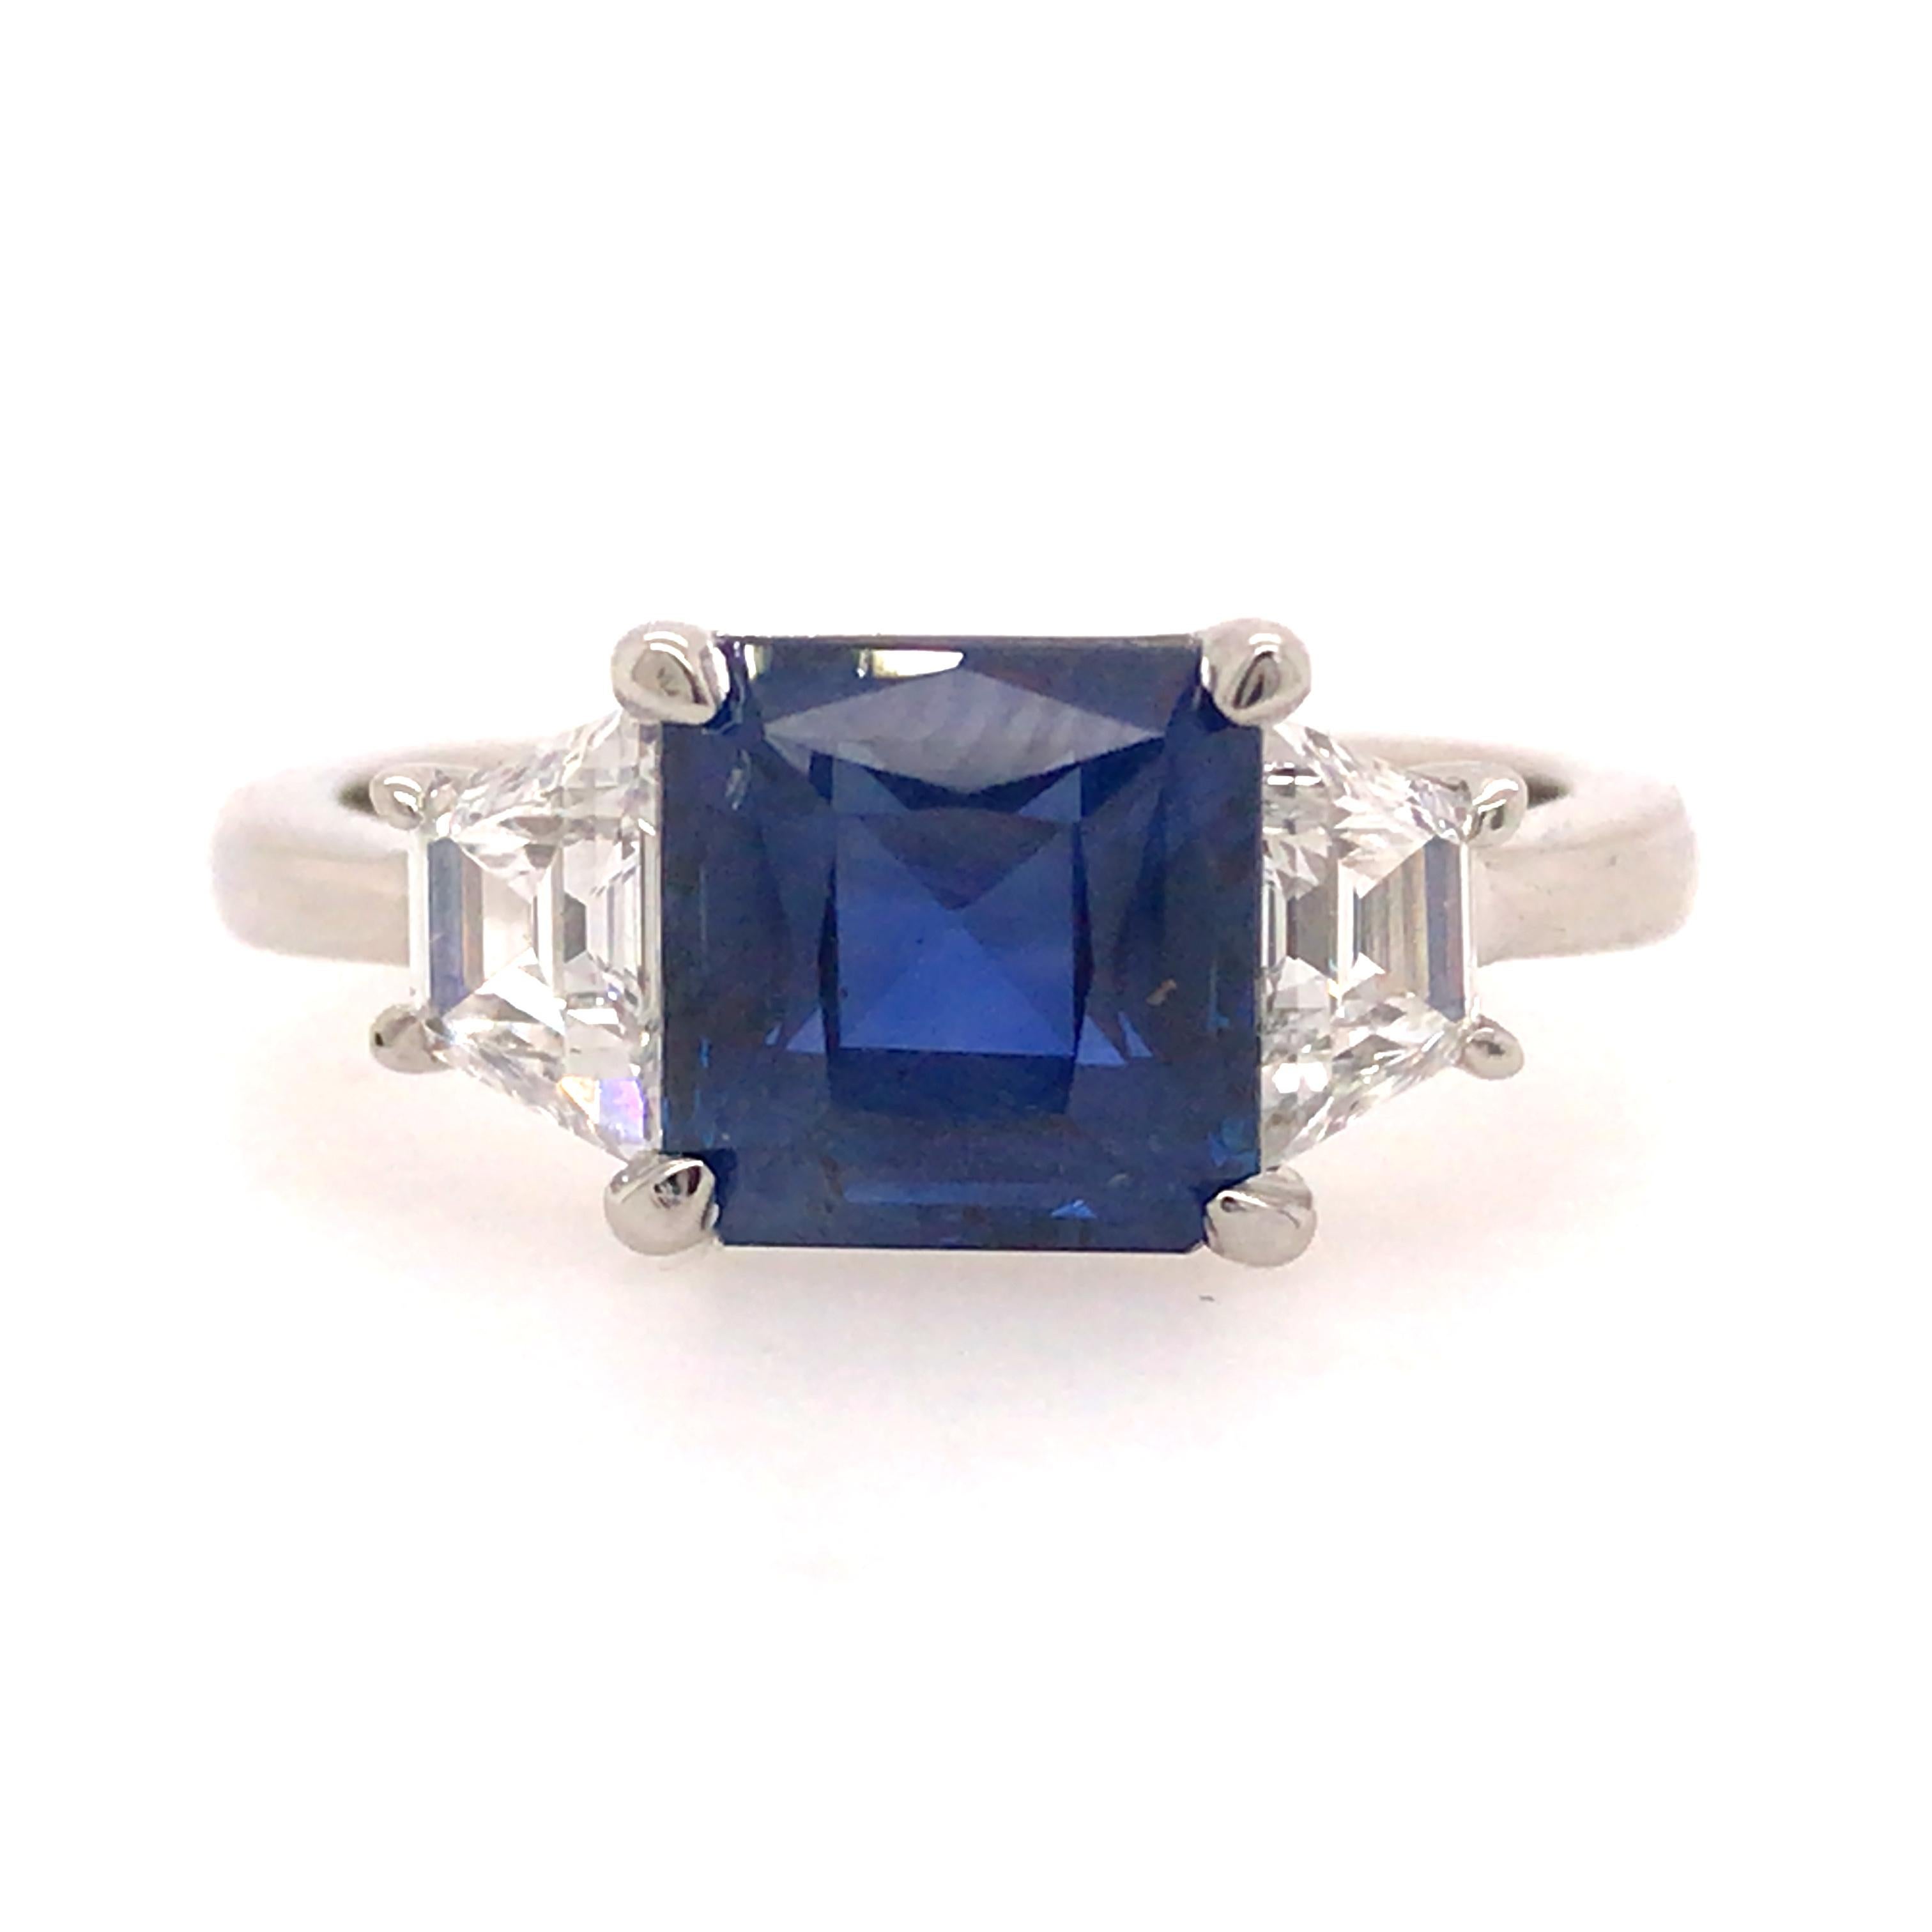 Sapphire and Diamond Three Stone Ring in Platinum.  2.92 Carat GIA Burma No Heat Octagonal Sapphire is flanked with (2) Trapezoid Cut Diamonds weighing 0.66 carat total weight, E-F in color and VS in clarity.  Ring size 6 1/2. 6.06 grams.  GIA